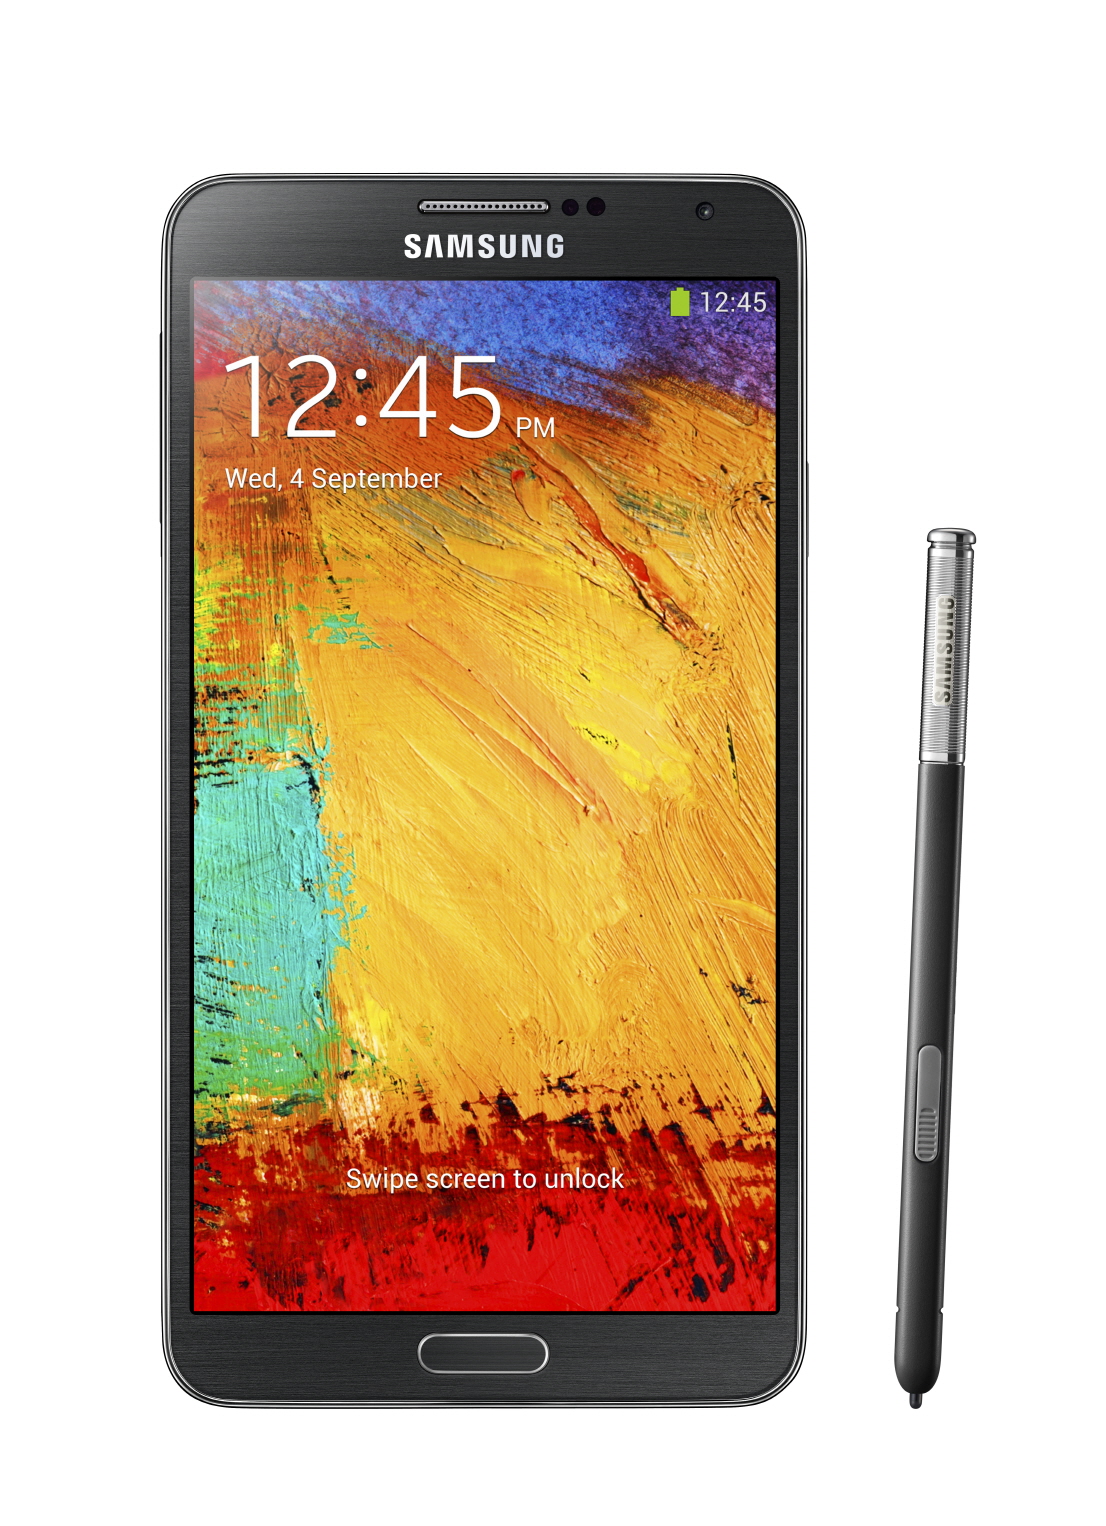 Samsung unveils the Galaxy Note 3 and 10.1 2014 edition with updated